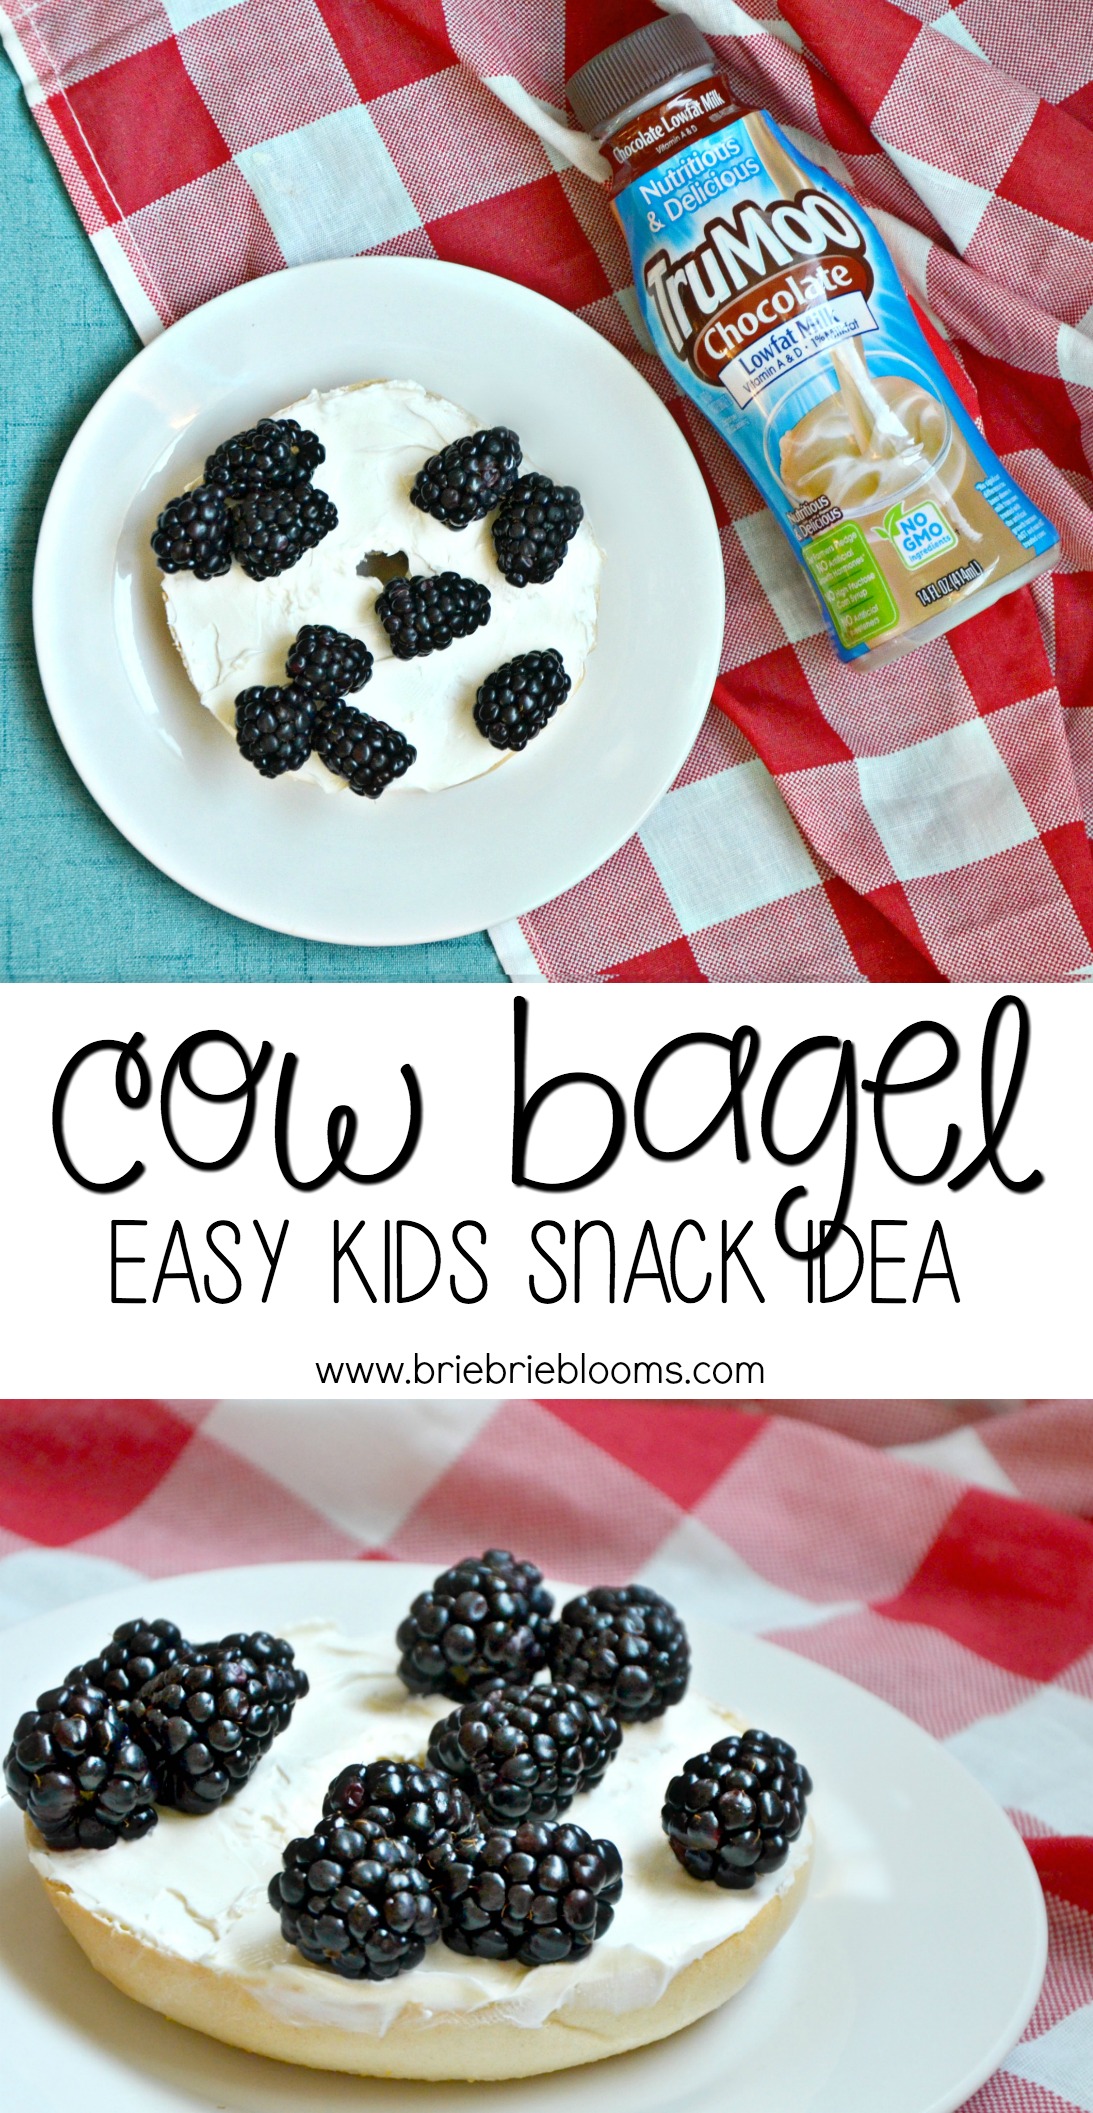 This cow bagel easy kids snack idea is a fun snack for summer with blackberries creatively placed to look like spots on a cow!